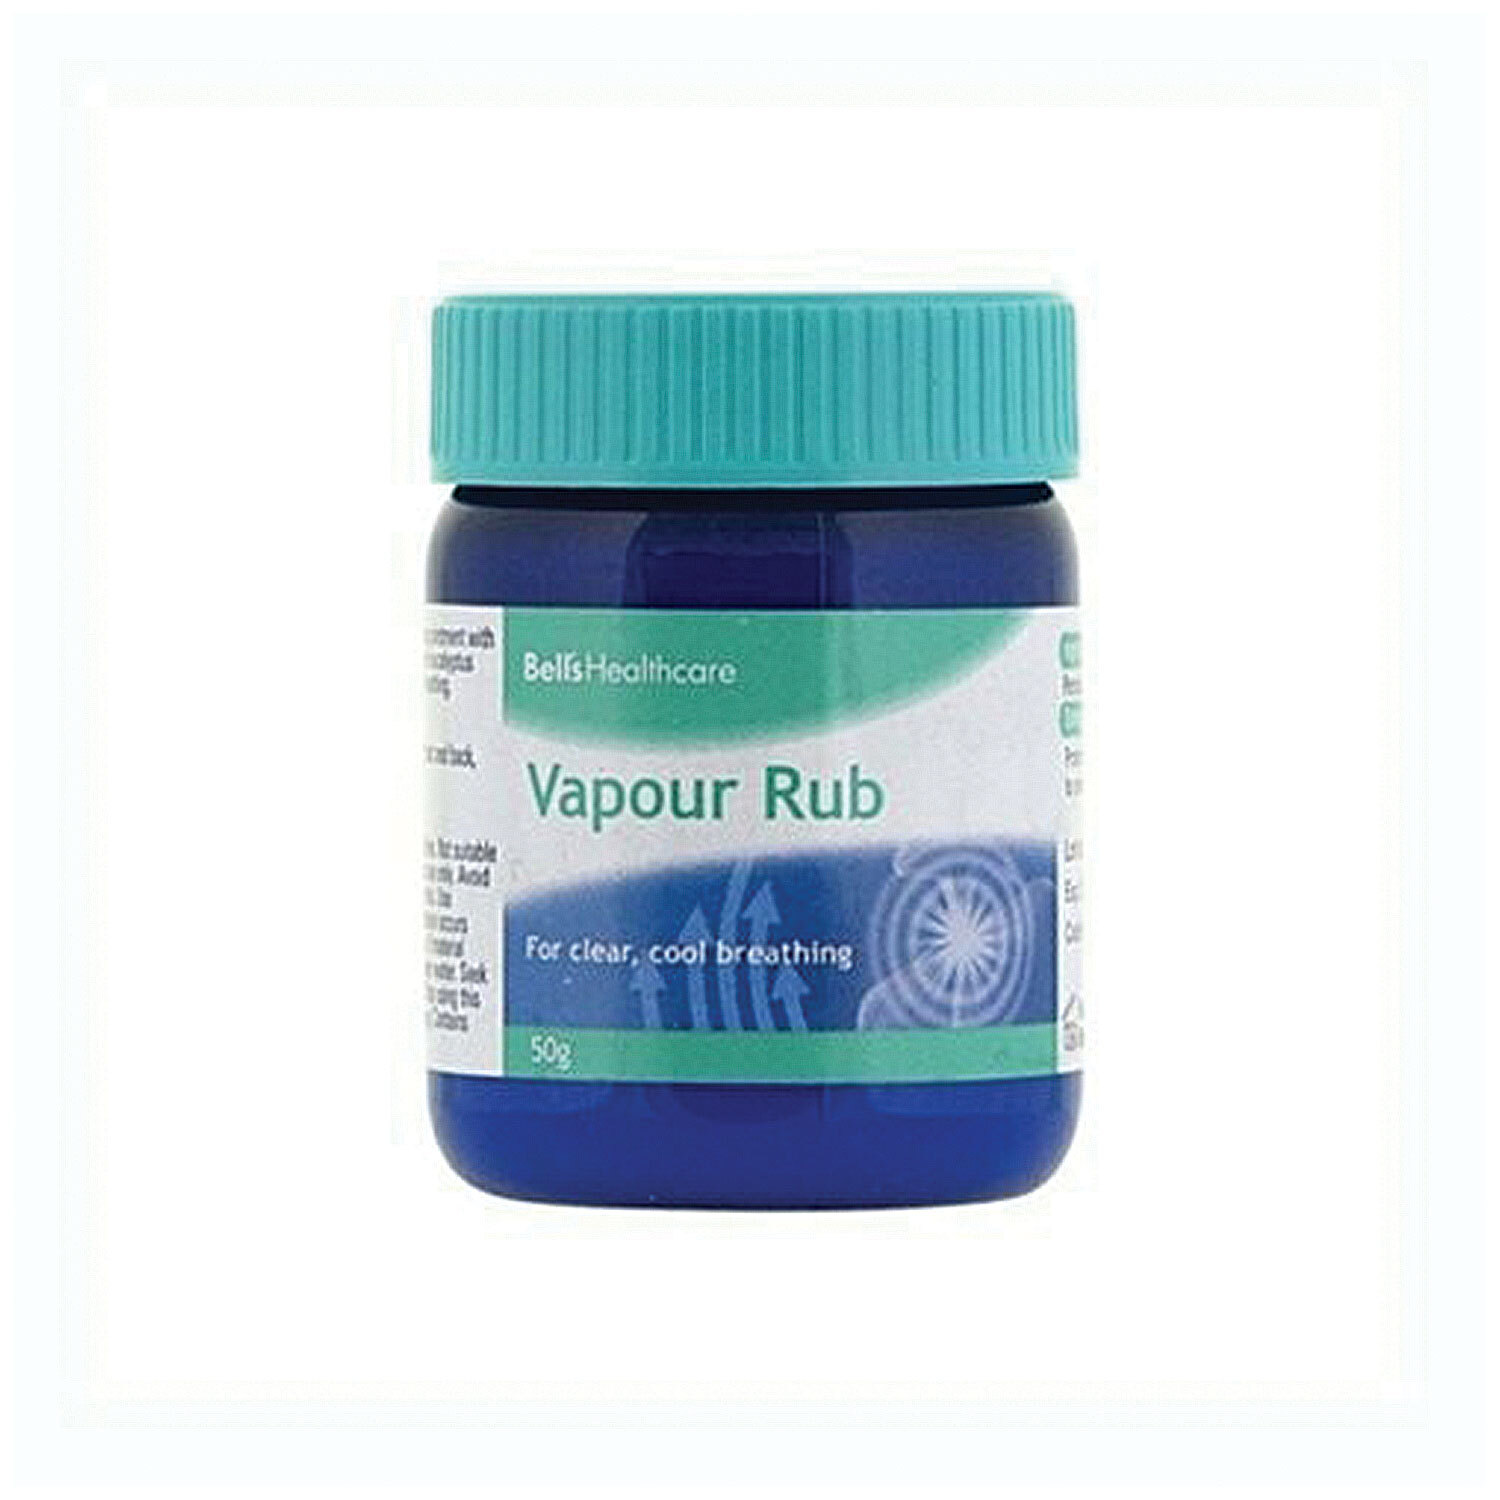 Bell's Healthcare Vapour Rub 50g Image